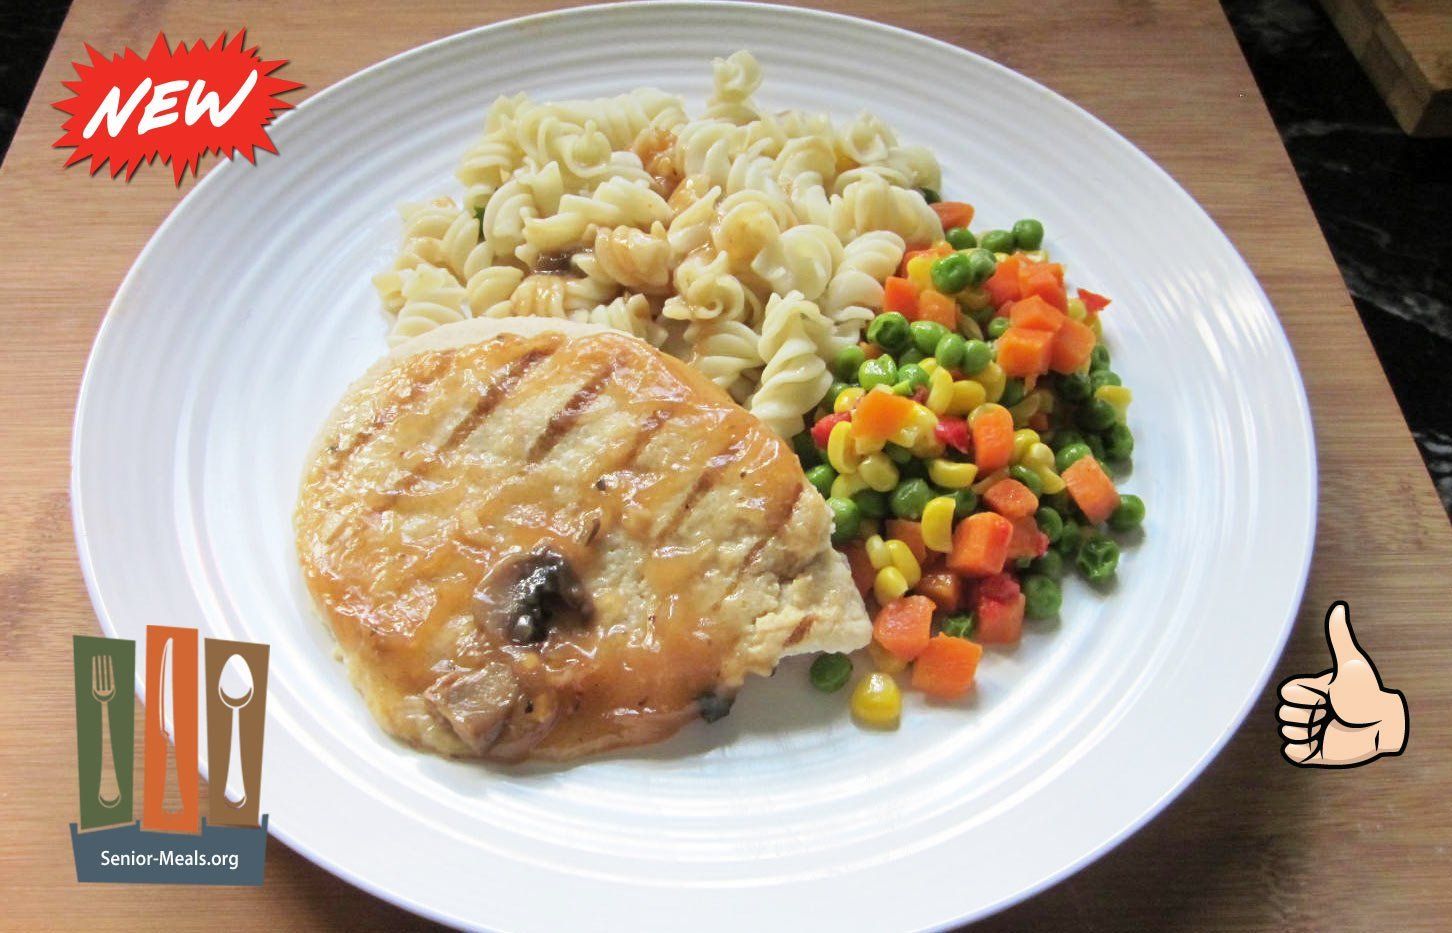 Chicken Marsala - Very Large Portion Size